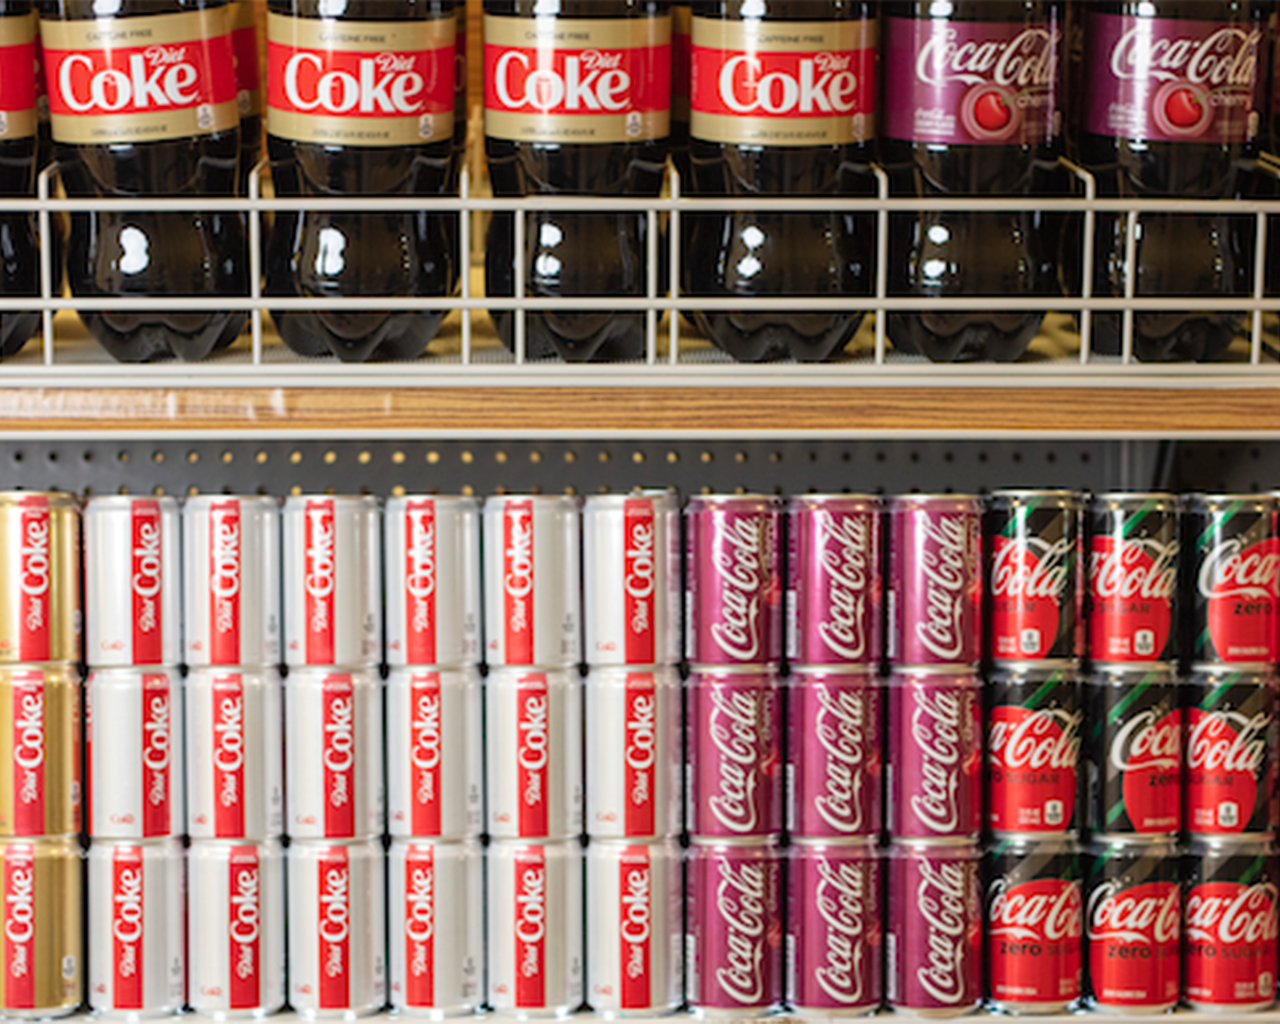 Shelf showing a variety of Coca-Cola products and packagings